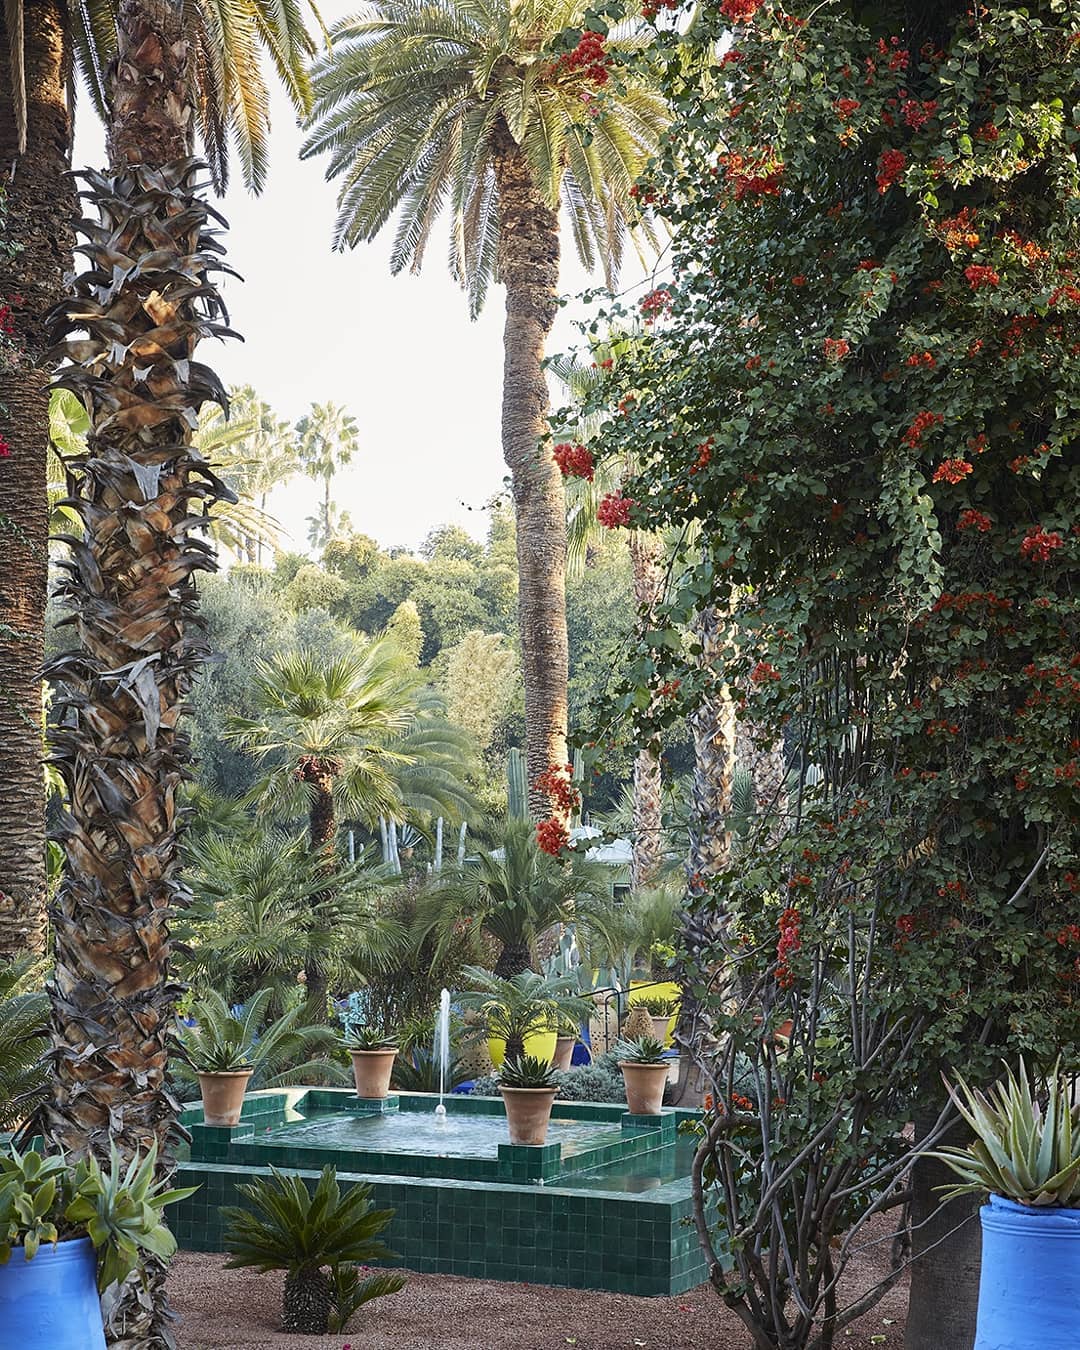 View into the garden of Jardin Majorelle with water fountain